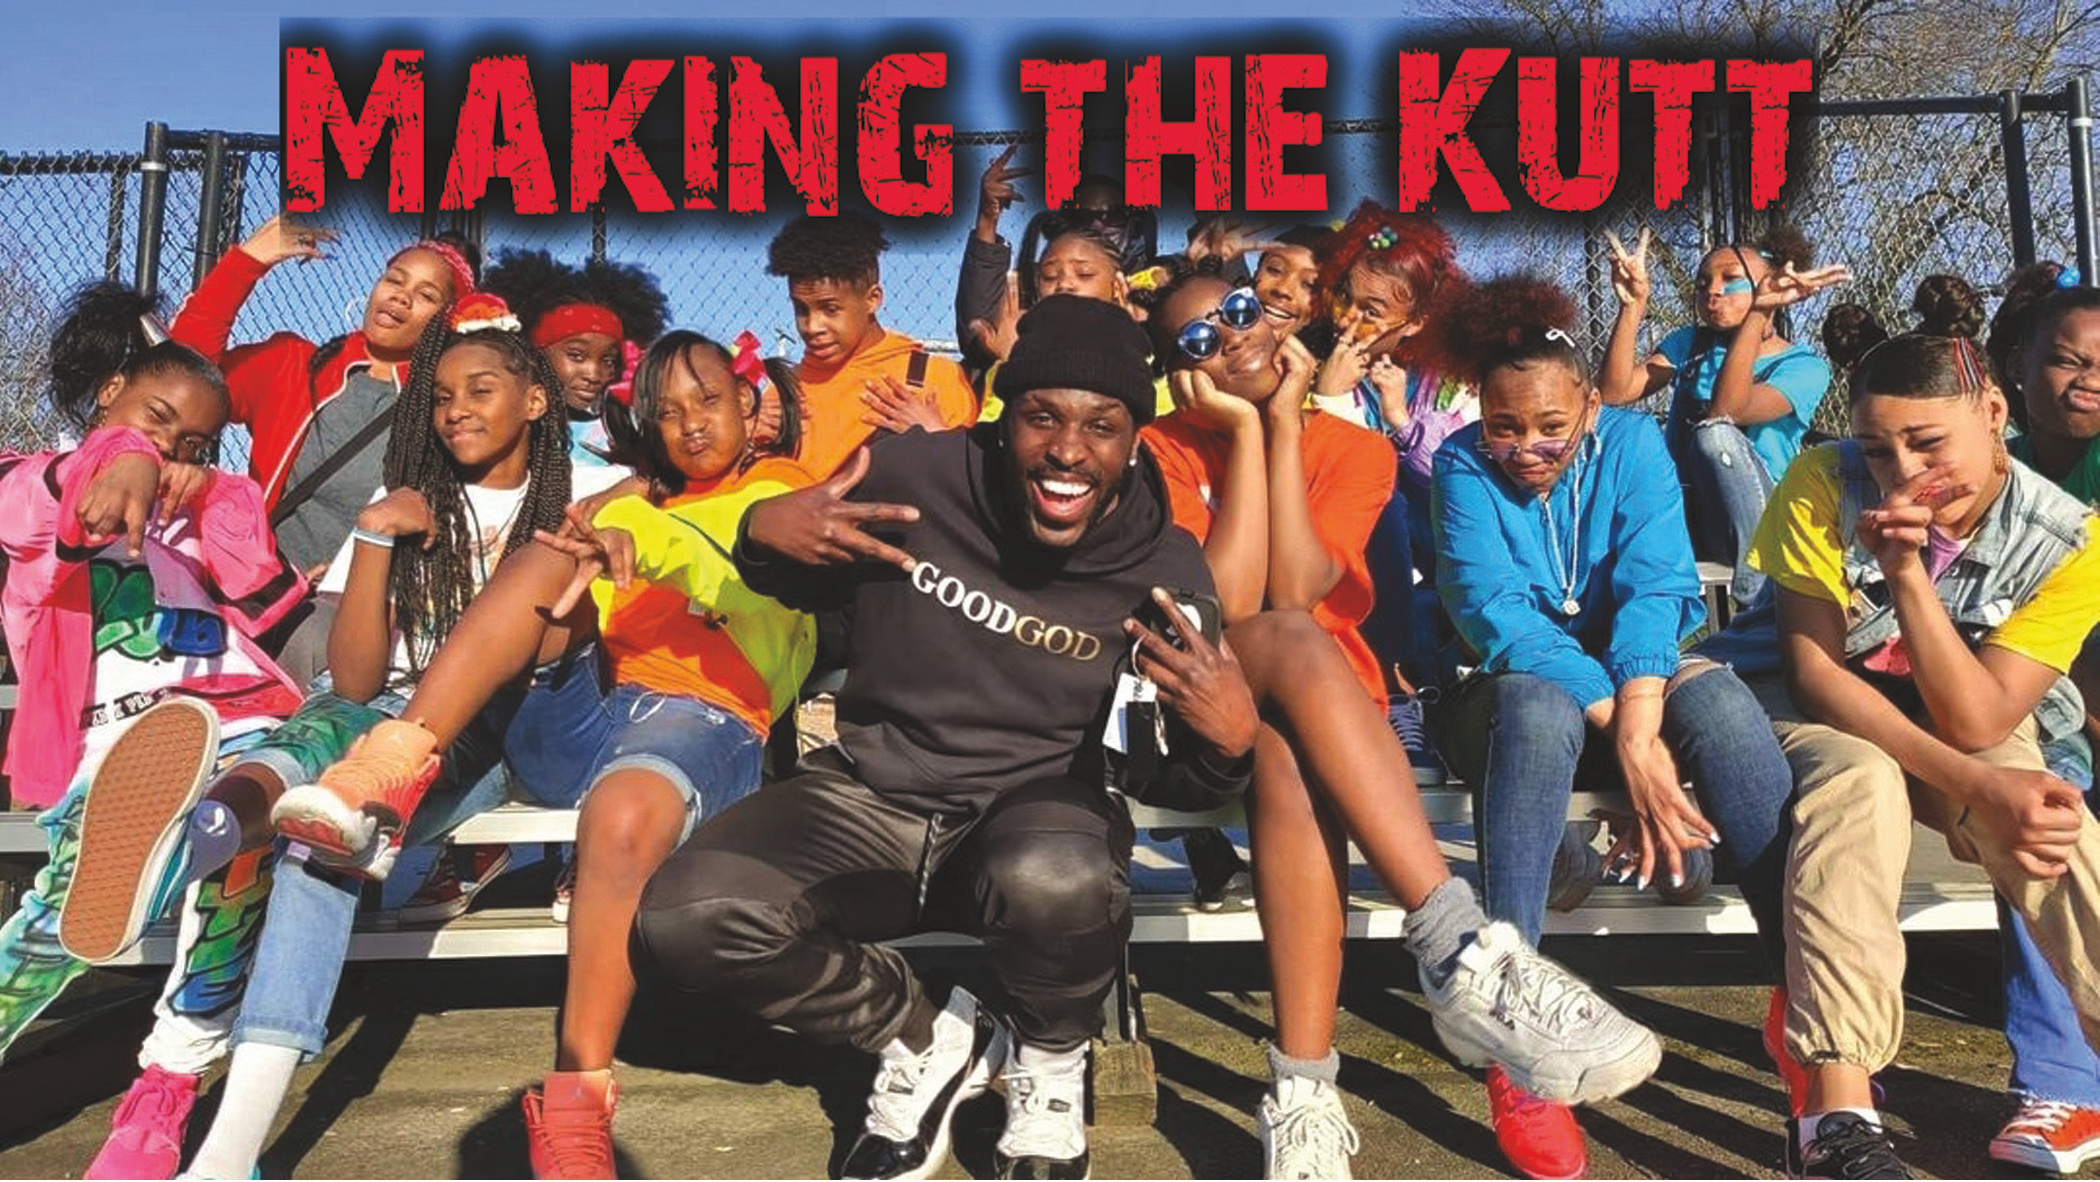 MAKING THE KUTT – Local Dance Team goes Viral